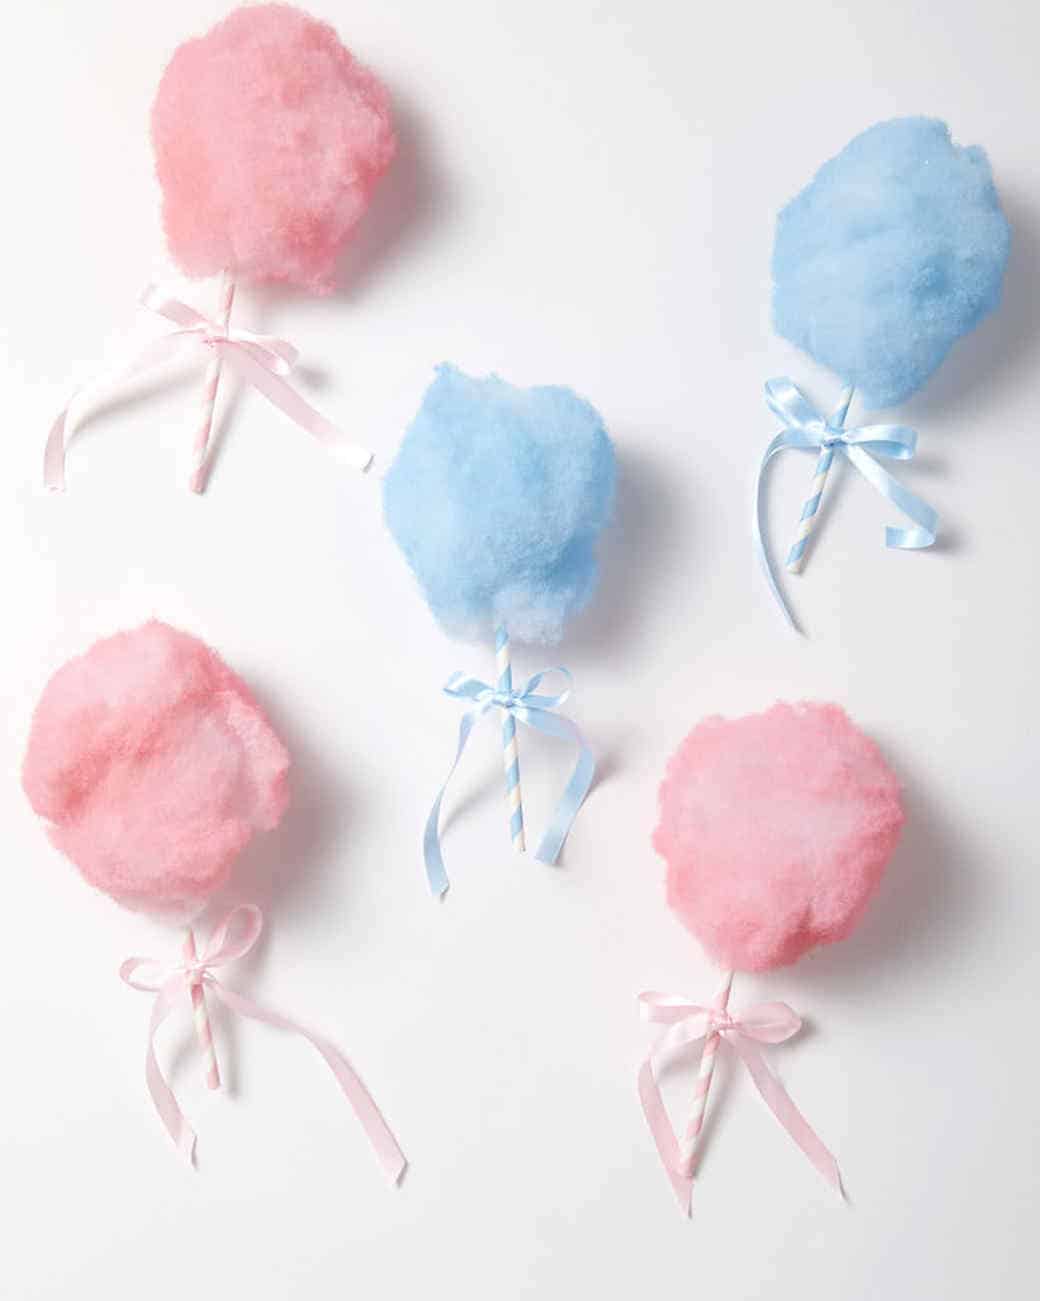 Cotton candy ornaments